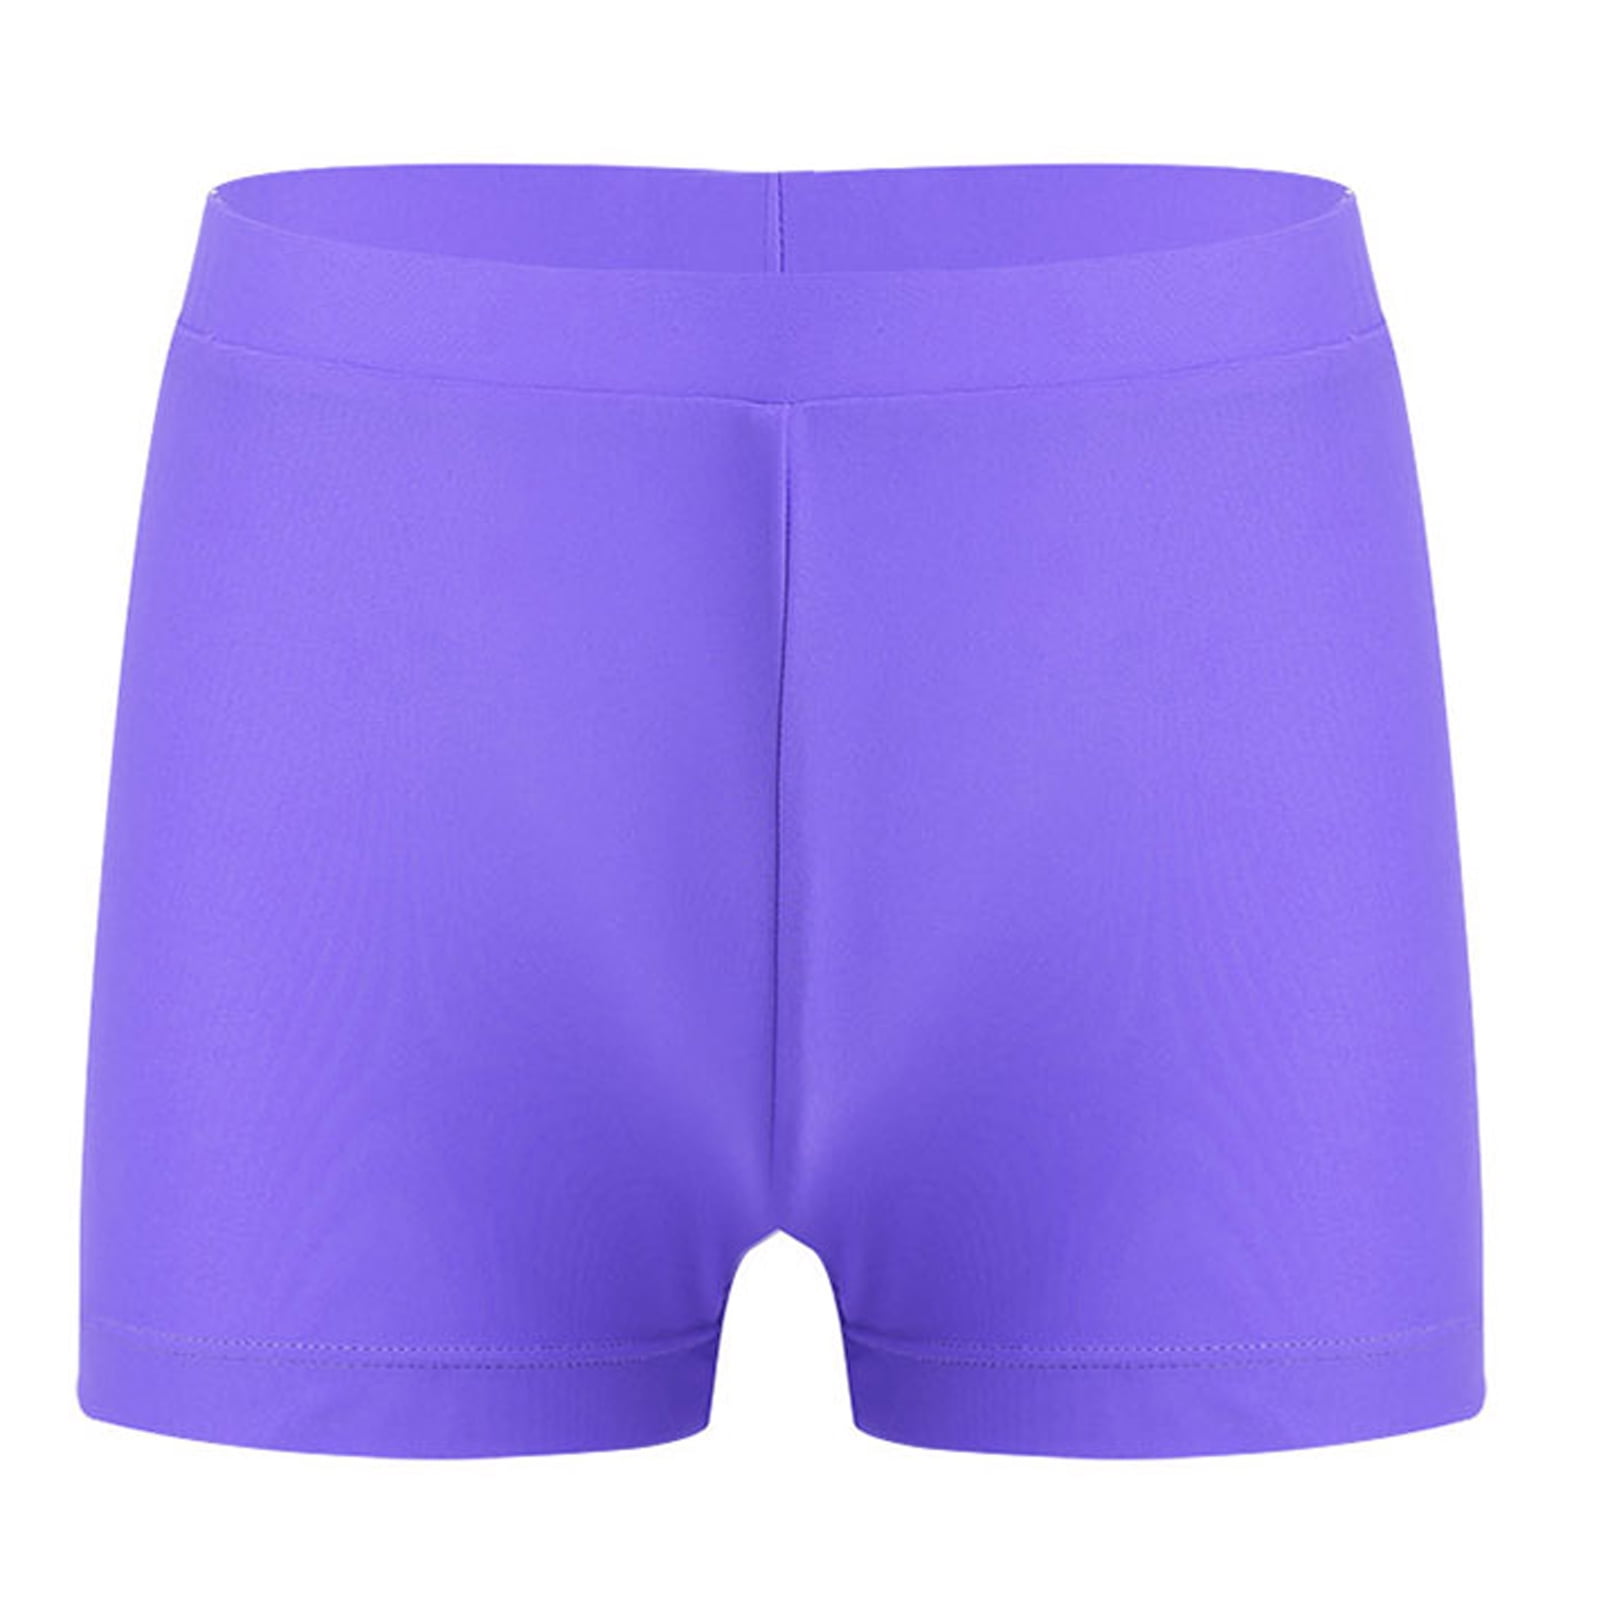 YiZYiF Kids Girls Quick-Dry Swimming Trunks Solid Color Swimwear Shorts ...